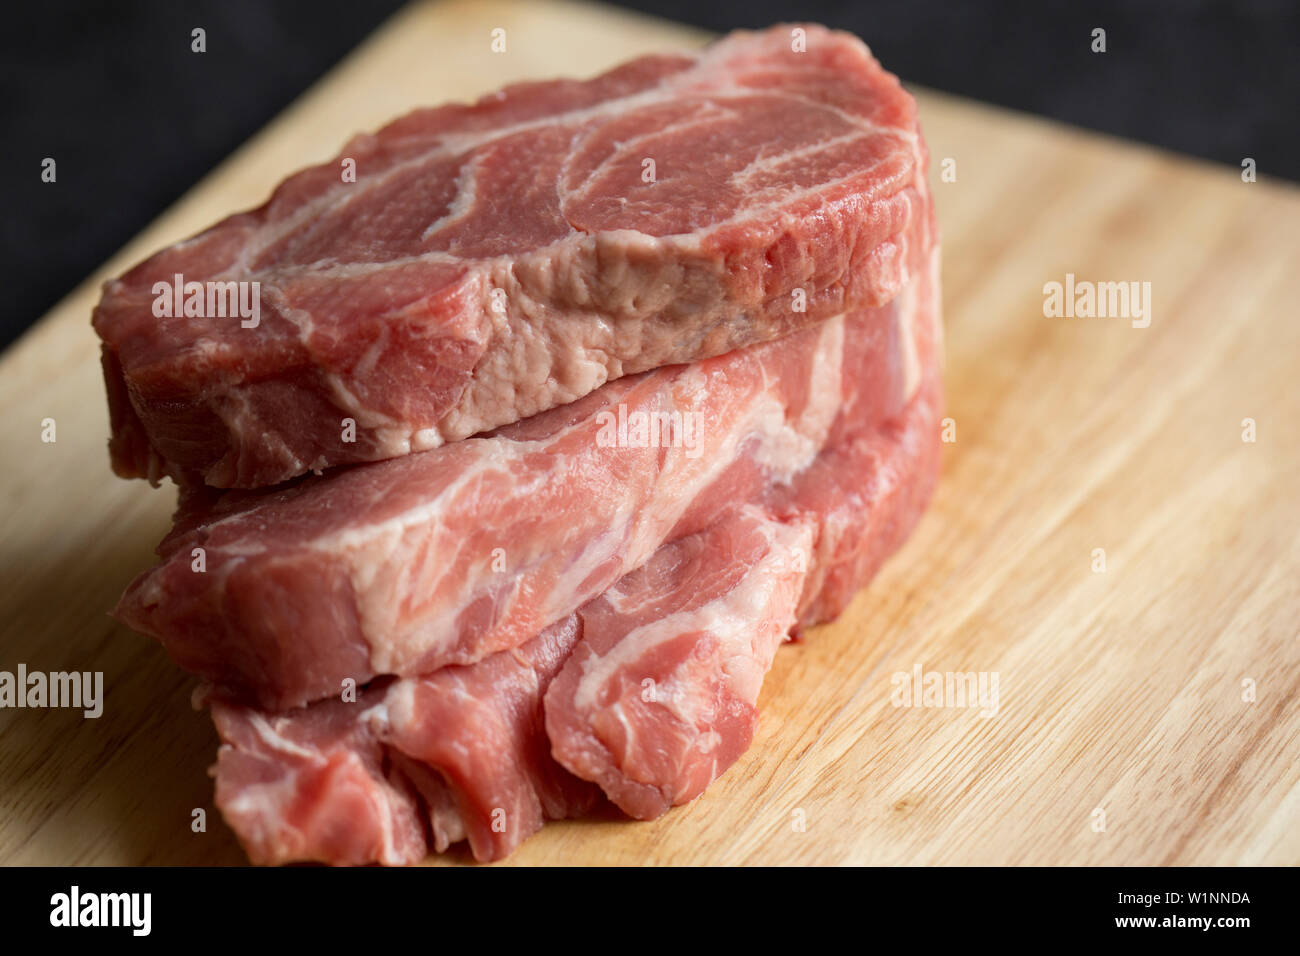 Three raw, uncooked British pork shoulder steaks bought from a supermarket in the UK. Dorset England UK GB Stock Photo